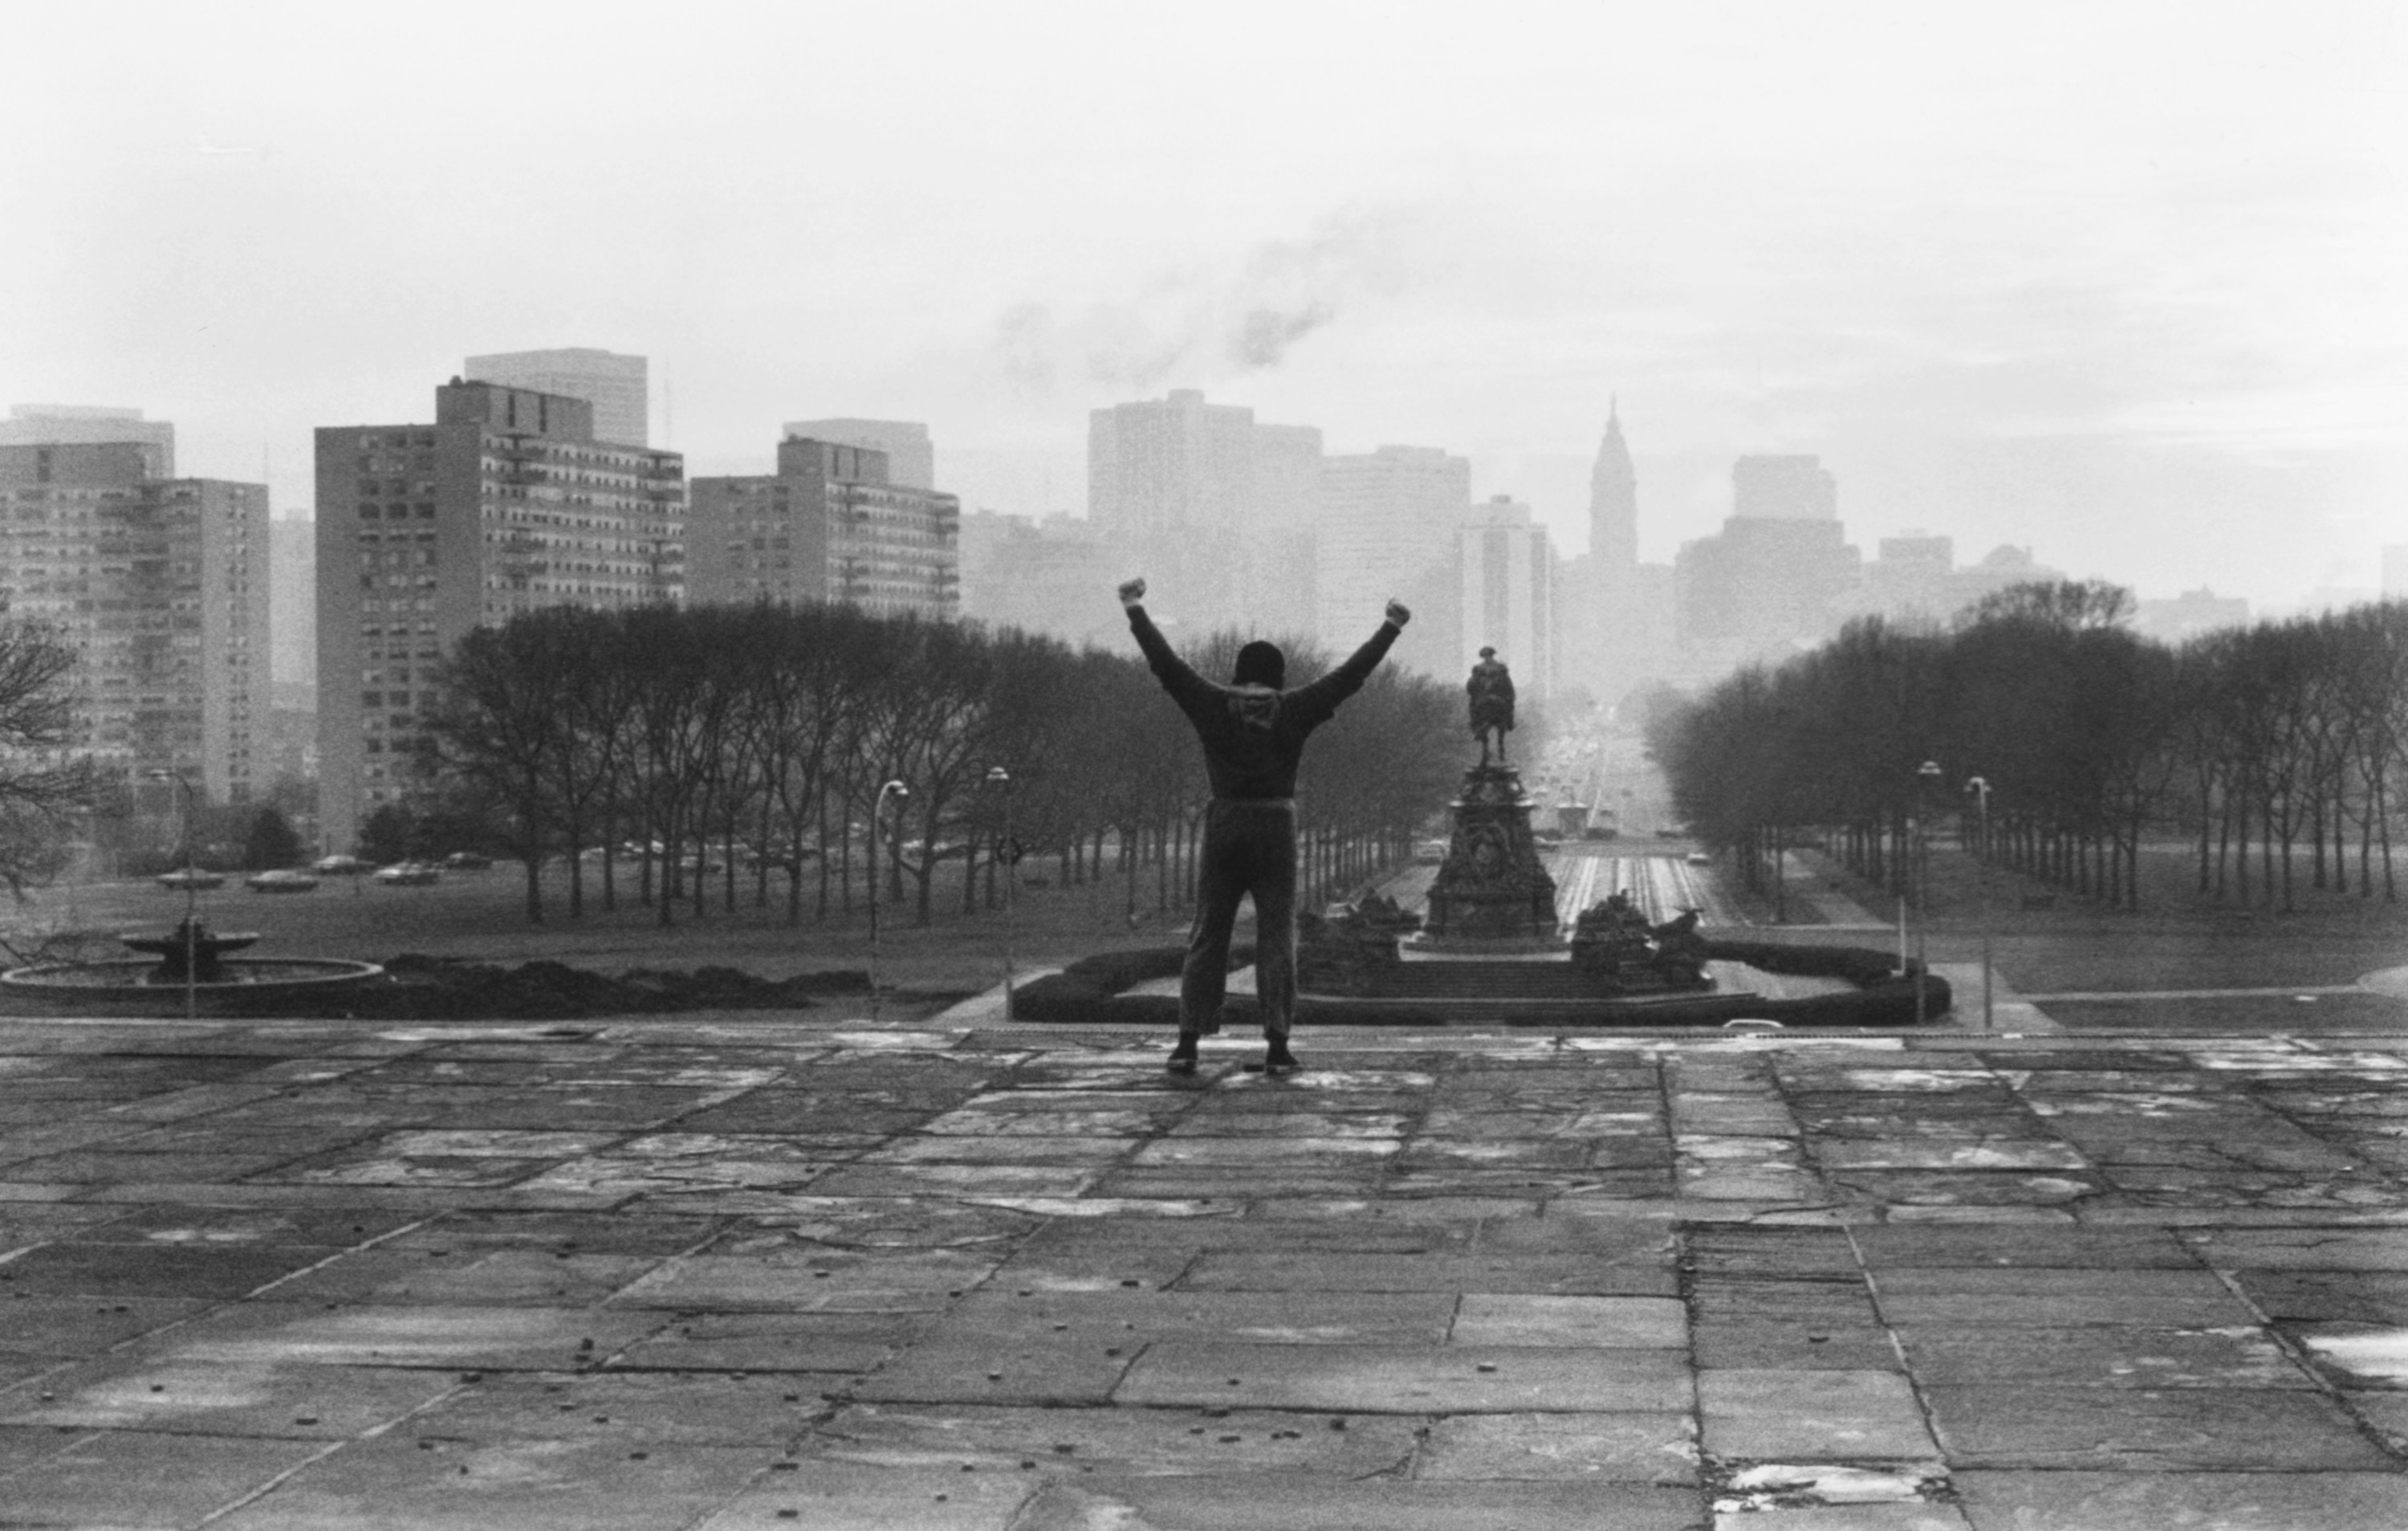 Sylvester Stallone raising his arms triumphantly at the top of the Philadelphia Museum of Art steps